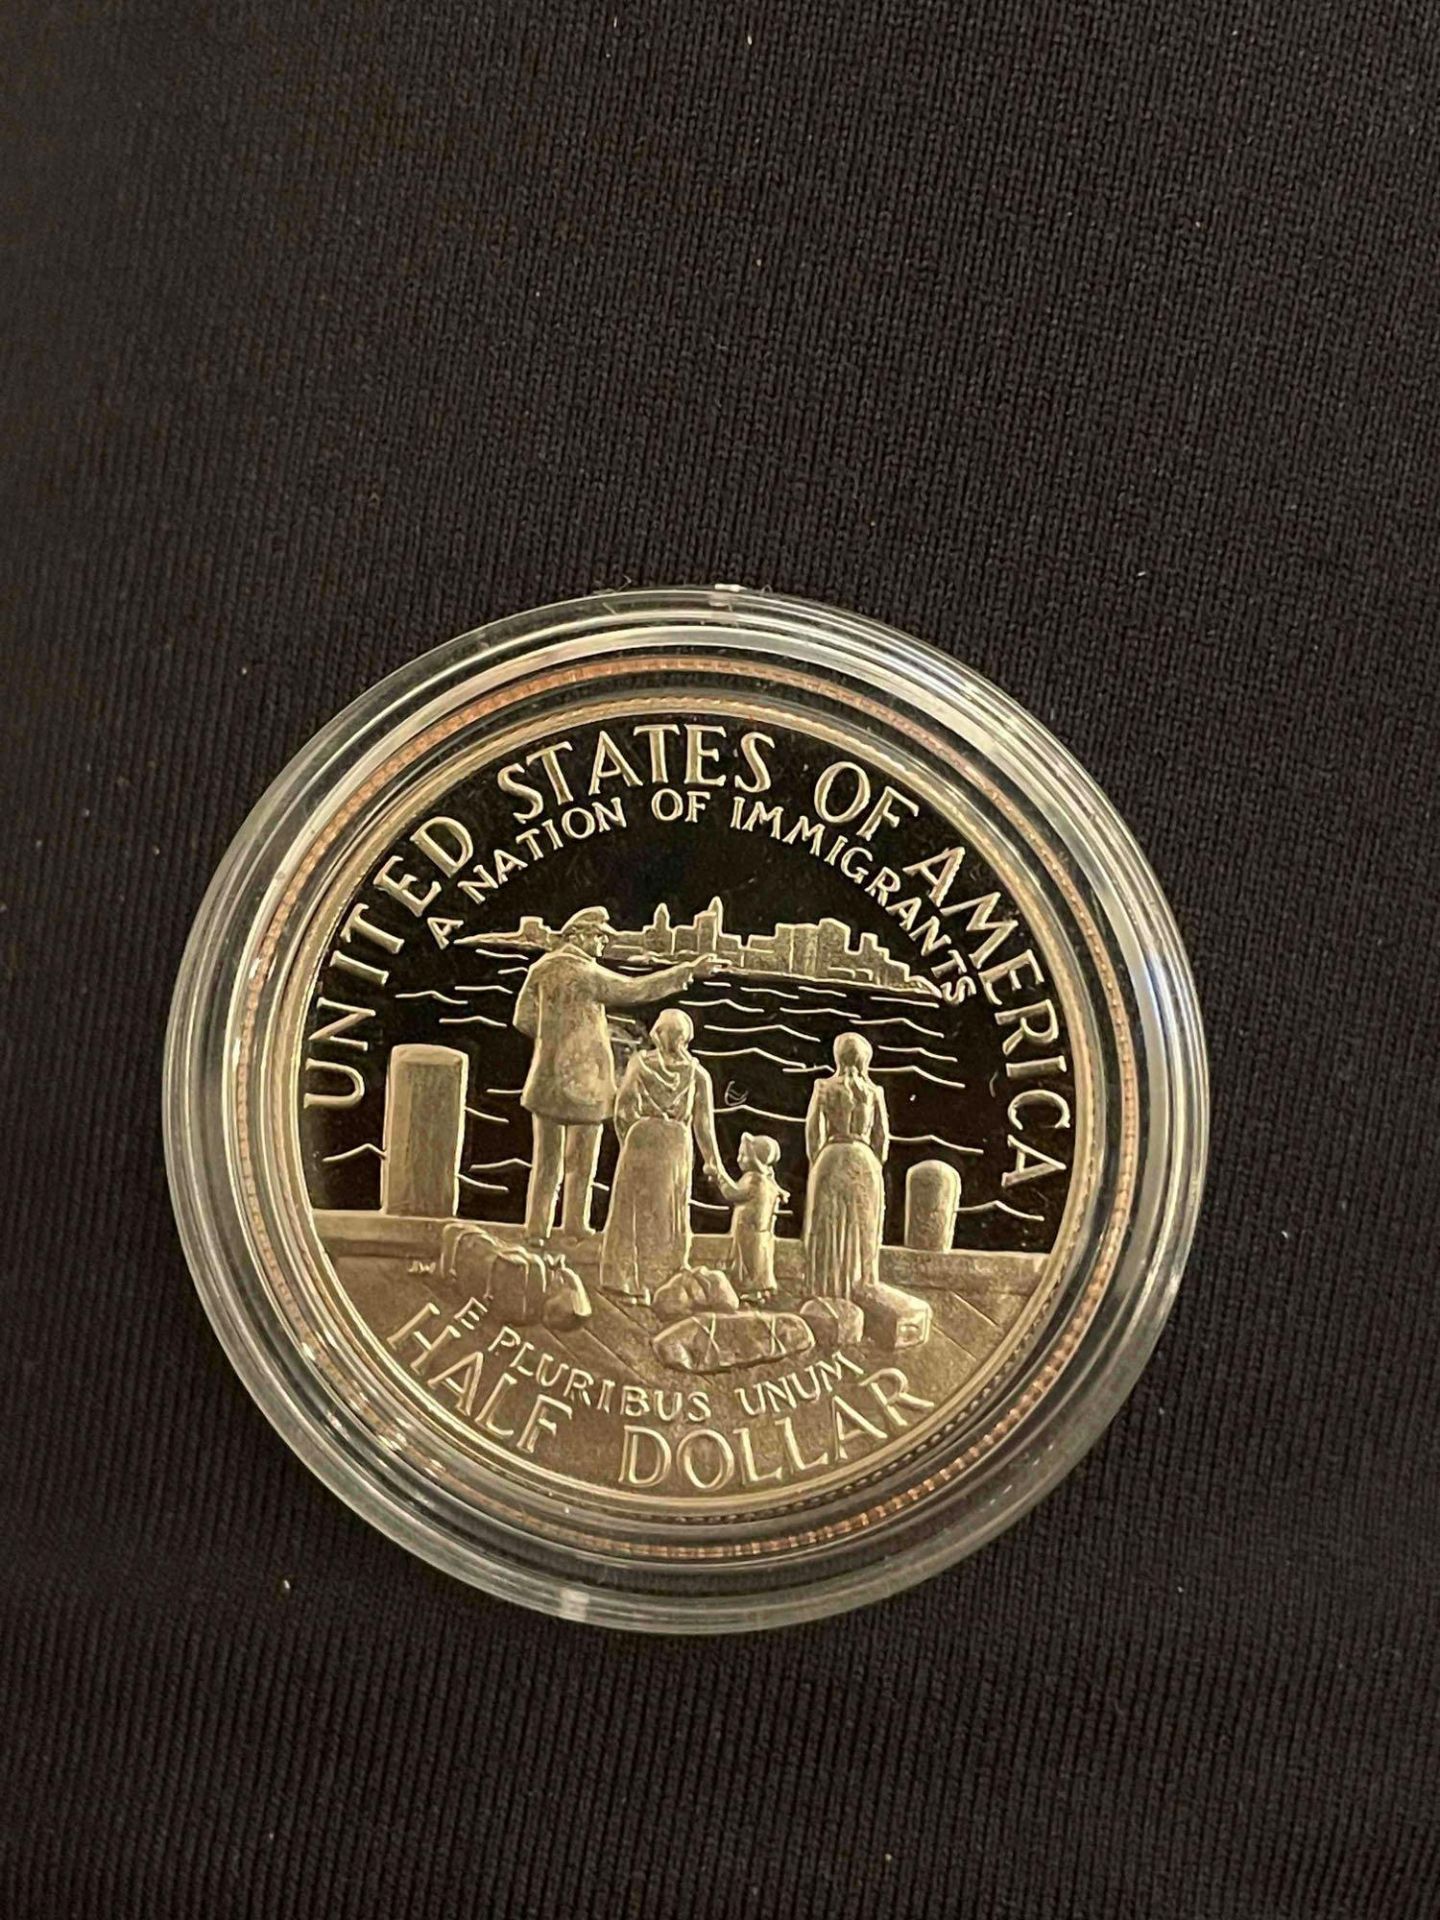 Statue of Liberty Coins - Image 3 of 4